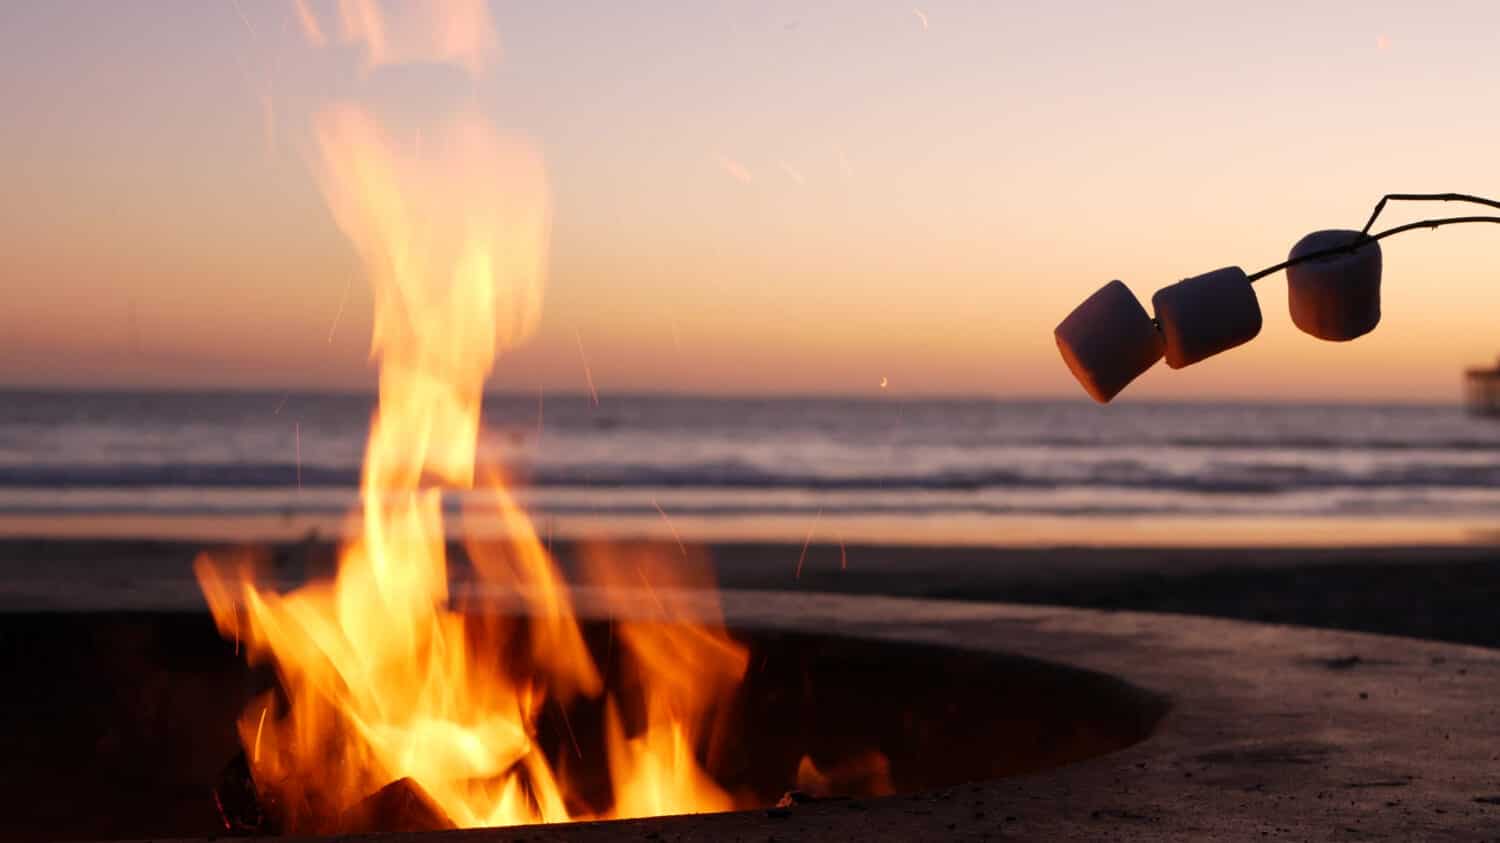 Campfire pit by Oceanside pier, California USA. Camp fire on ocean beach, bonfire flame in cement ring place for bbq, sea water waves. Heating, roast or toast marshmallow on stick. Romantic sunset sky